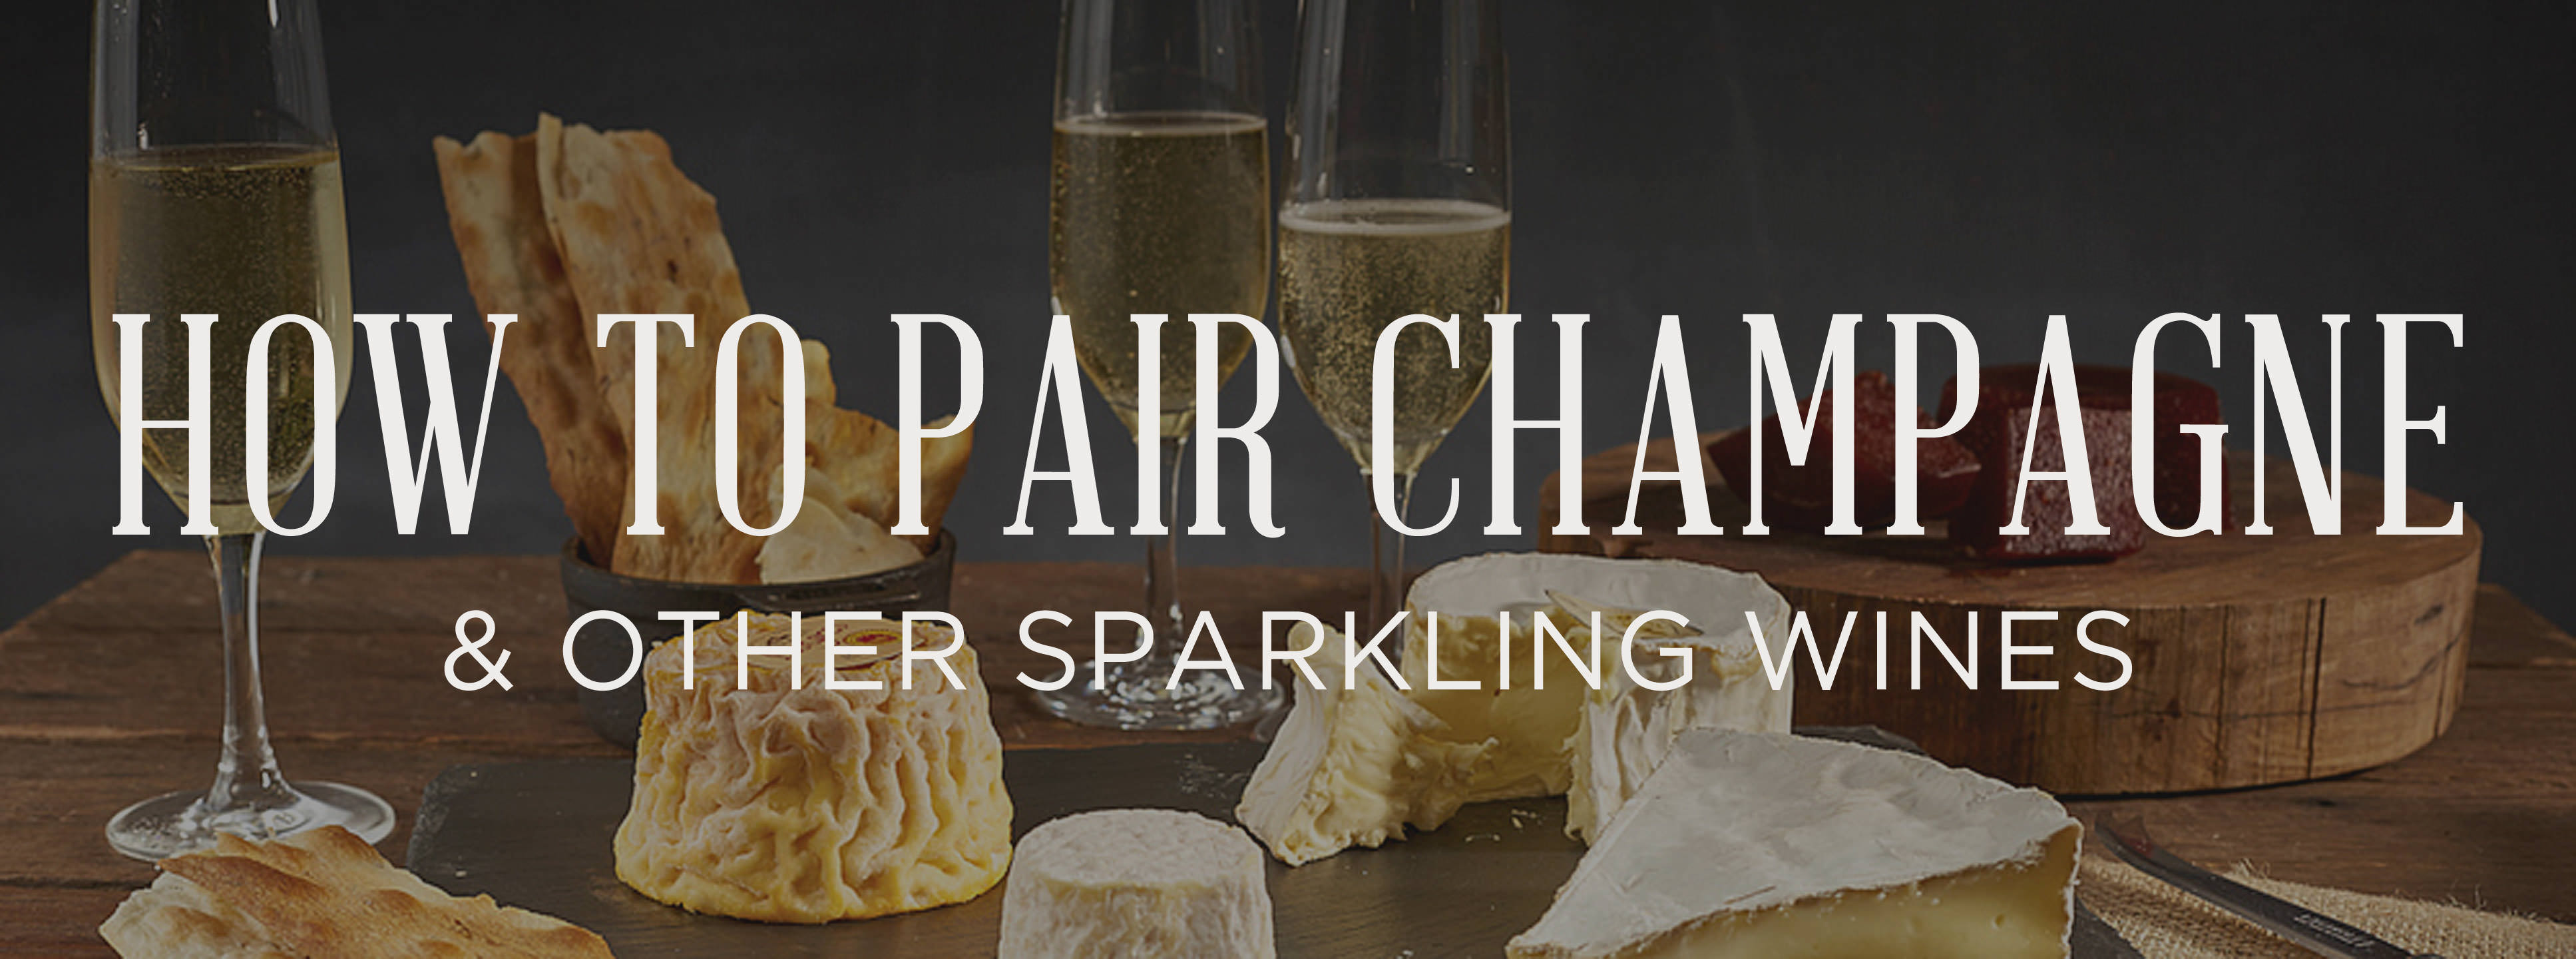 how to pair champagne